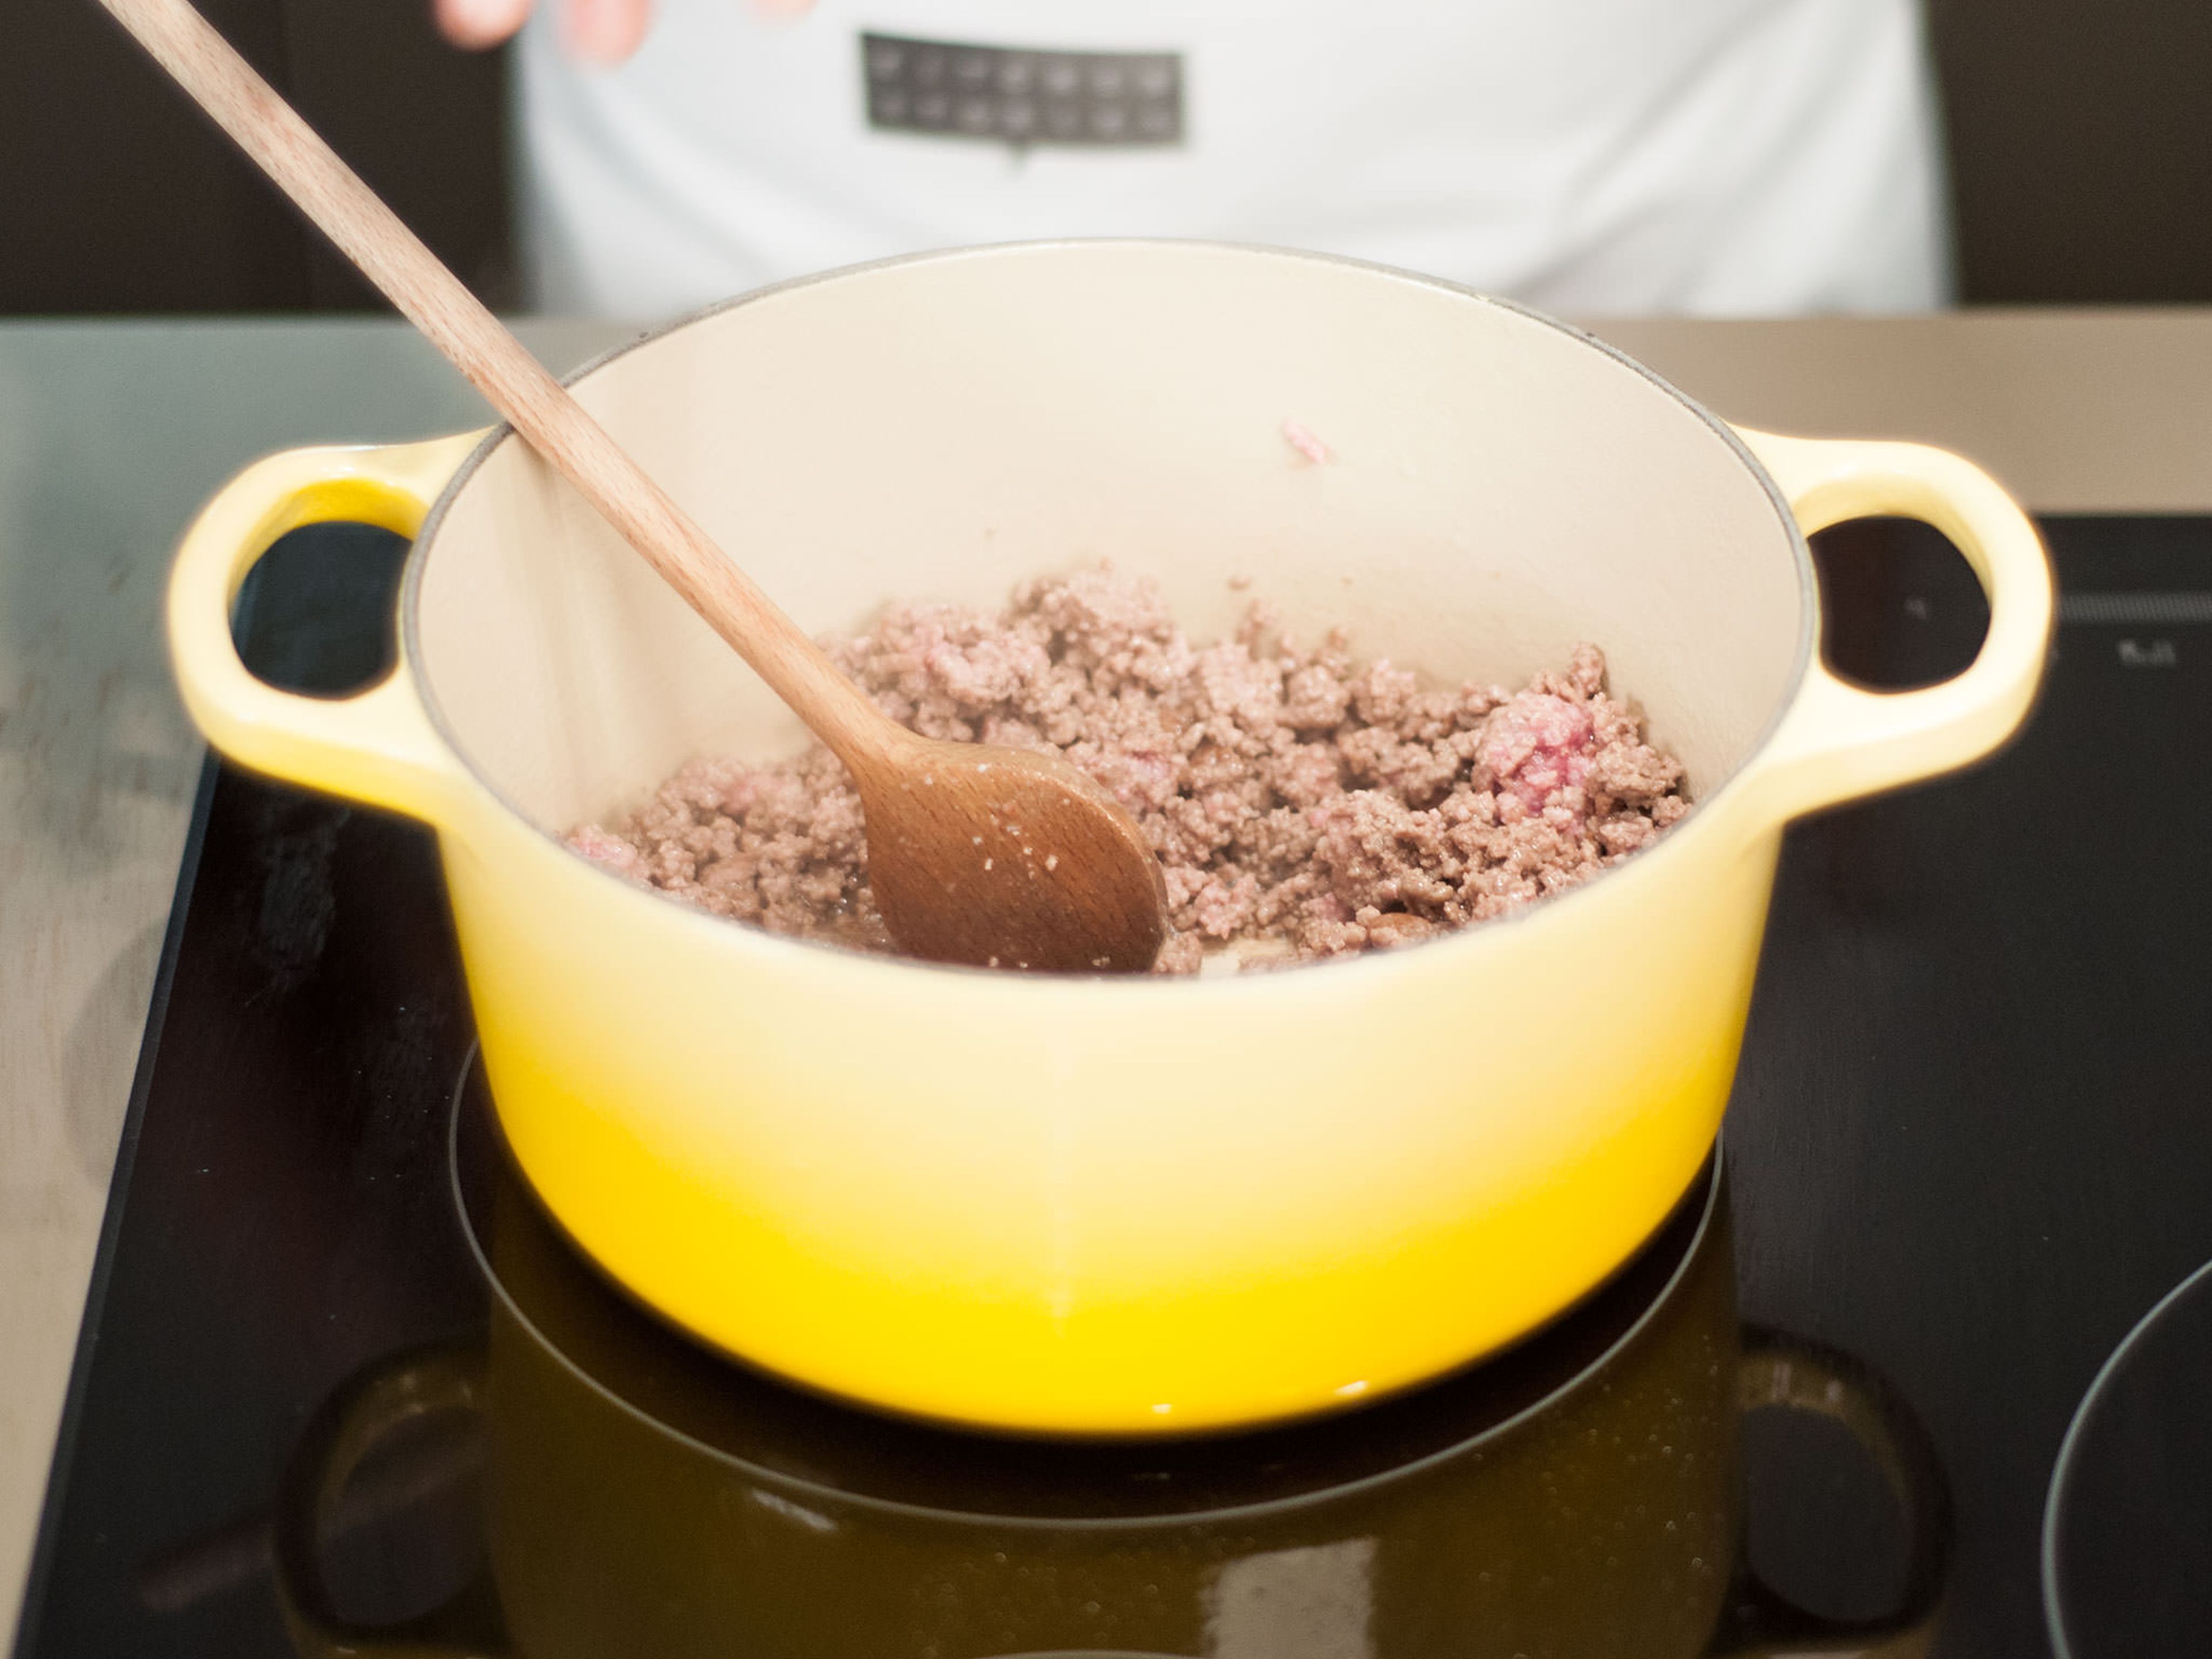 Heat up some vegetable oil in a large saucepan over medium heat. Add ground beef and sauté for approx. 2 – 3 min. Then add  VIVA LA SPICE seasoning (if using), chili, and onions. Avoid stirring too much so that the meat stays flavorful.